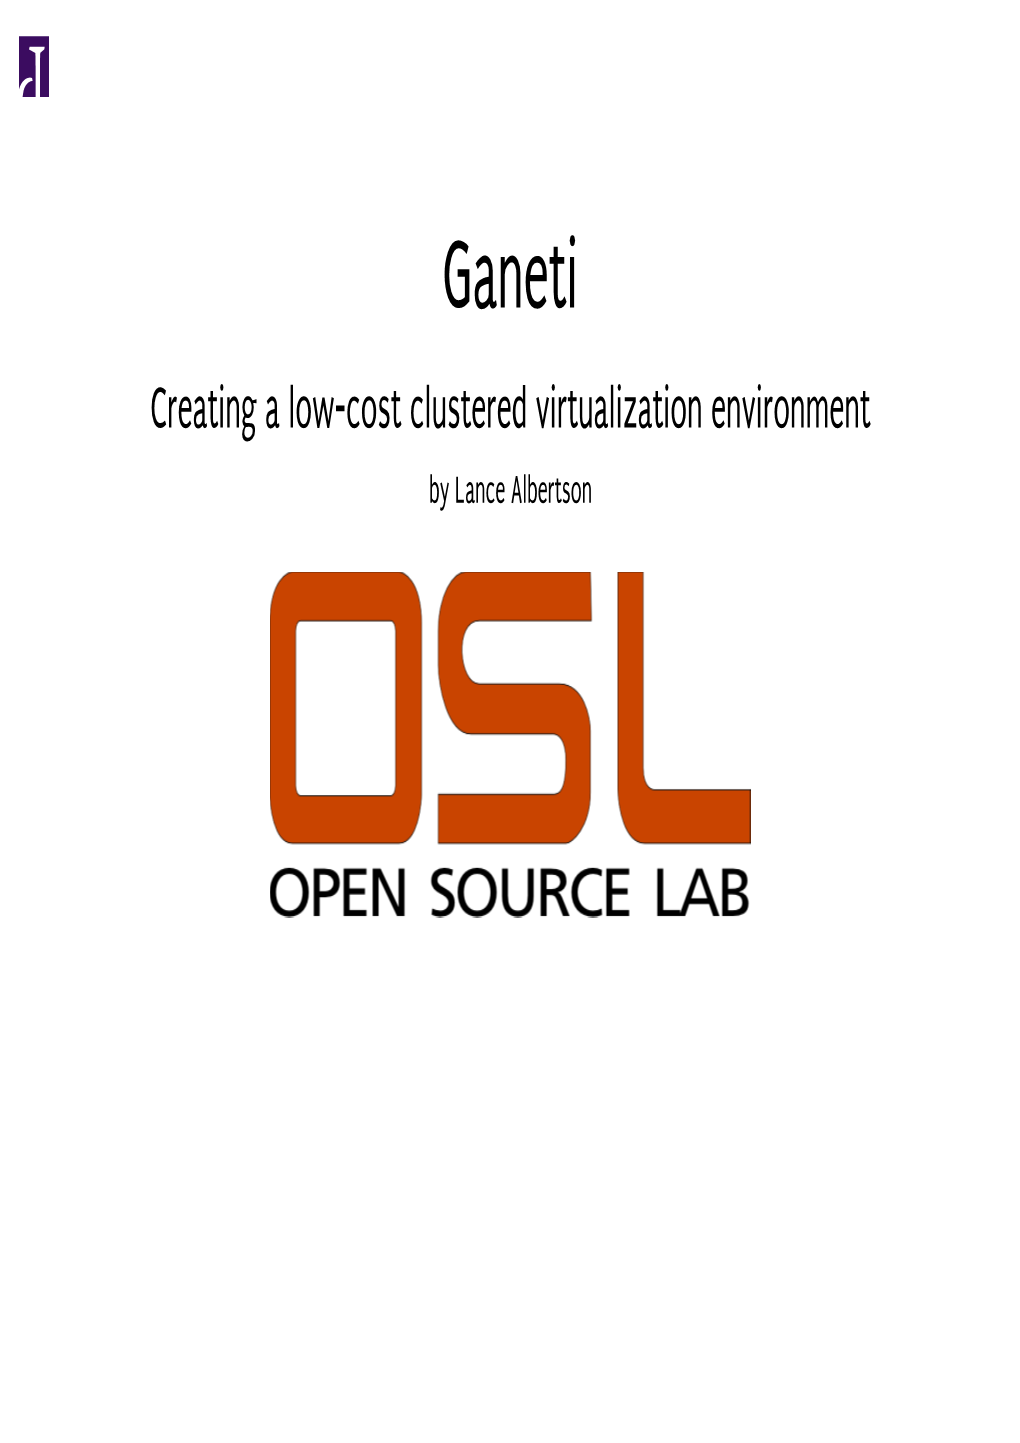 Ganeti Creating a Low-Cost Clustered Virtualization Environment by Lance Albertson About Me